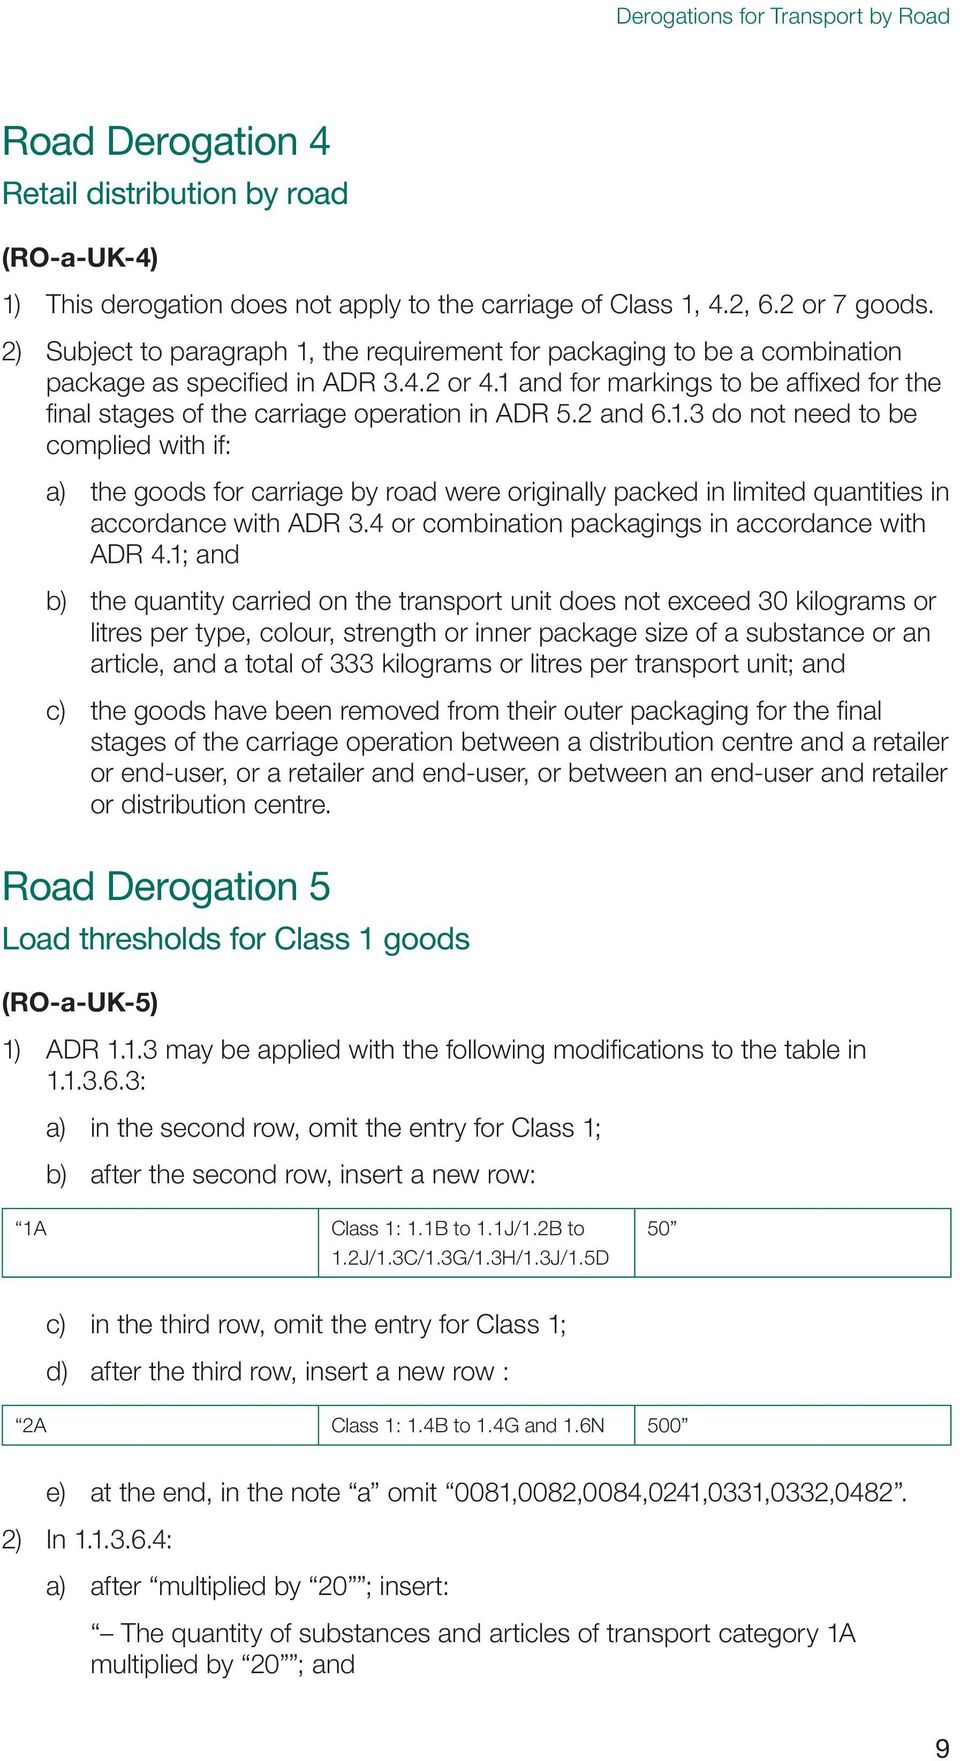 1 and for markings to be affixed for the final stages of the carriage operation in ADR 5.2 and 6.1.3 do not need to be complied with if: a) the goods for carriage by road were originally packed in limited quantities in accordance with ADR 3.